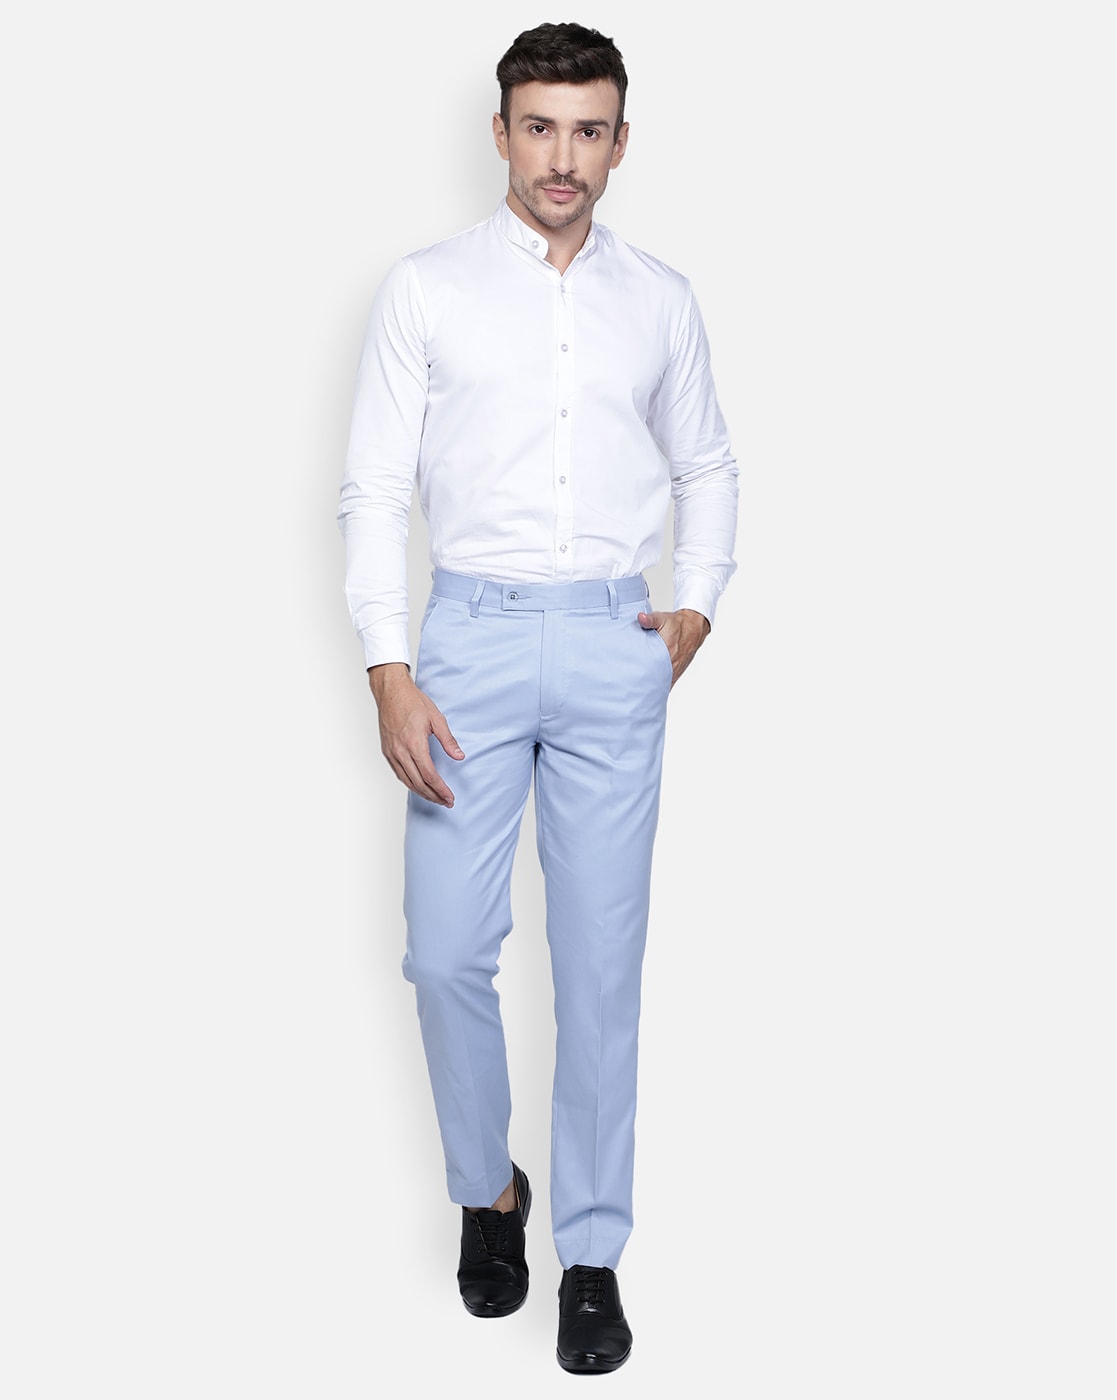 What colour pants go well with a light blue shirt for men  Quora